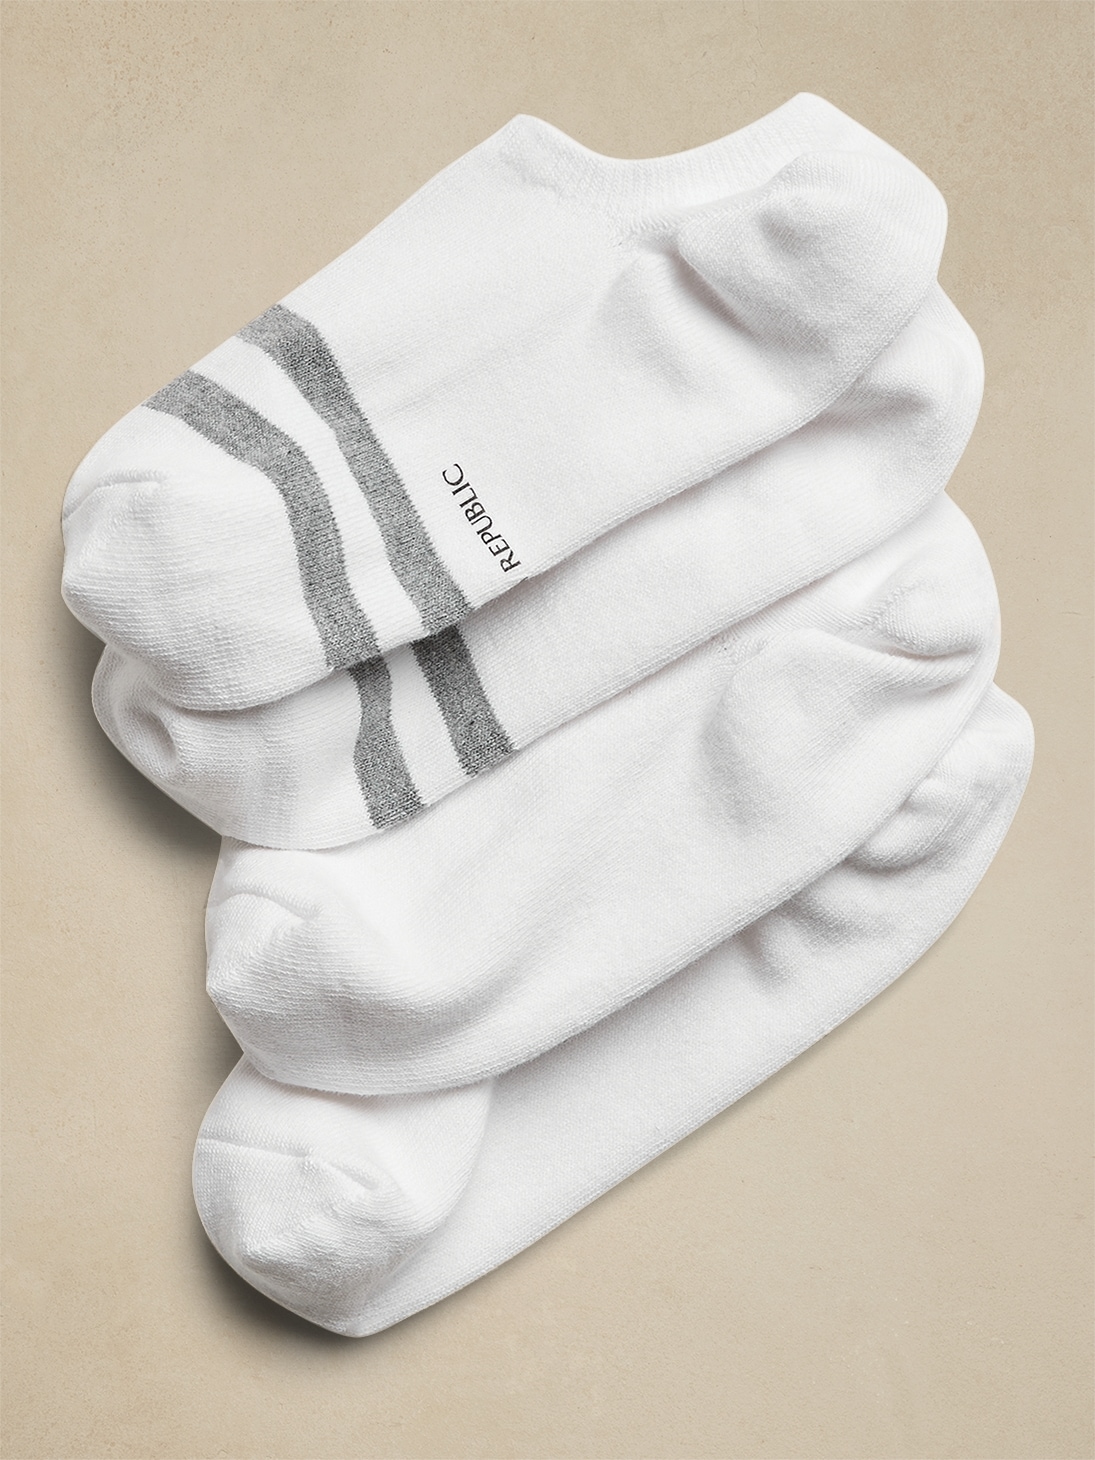 Bananarepublic Ultra No-Show Sock 2-Pack with Coolmax Technology